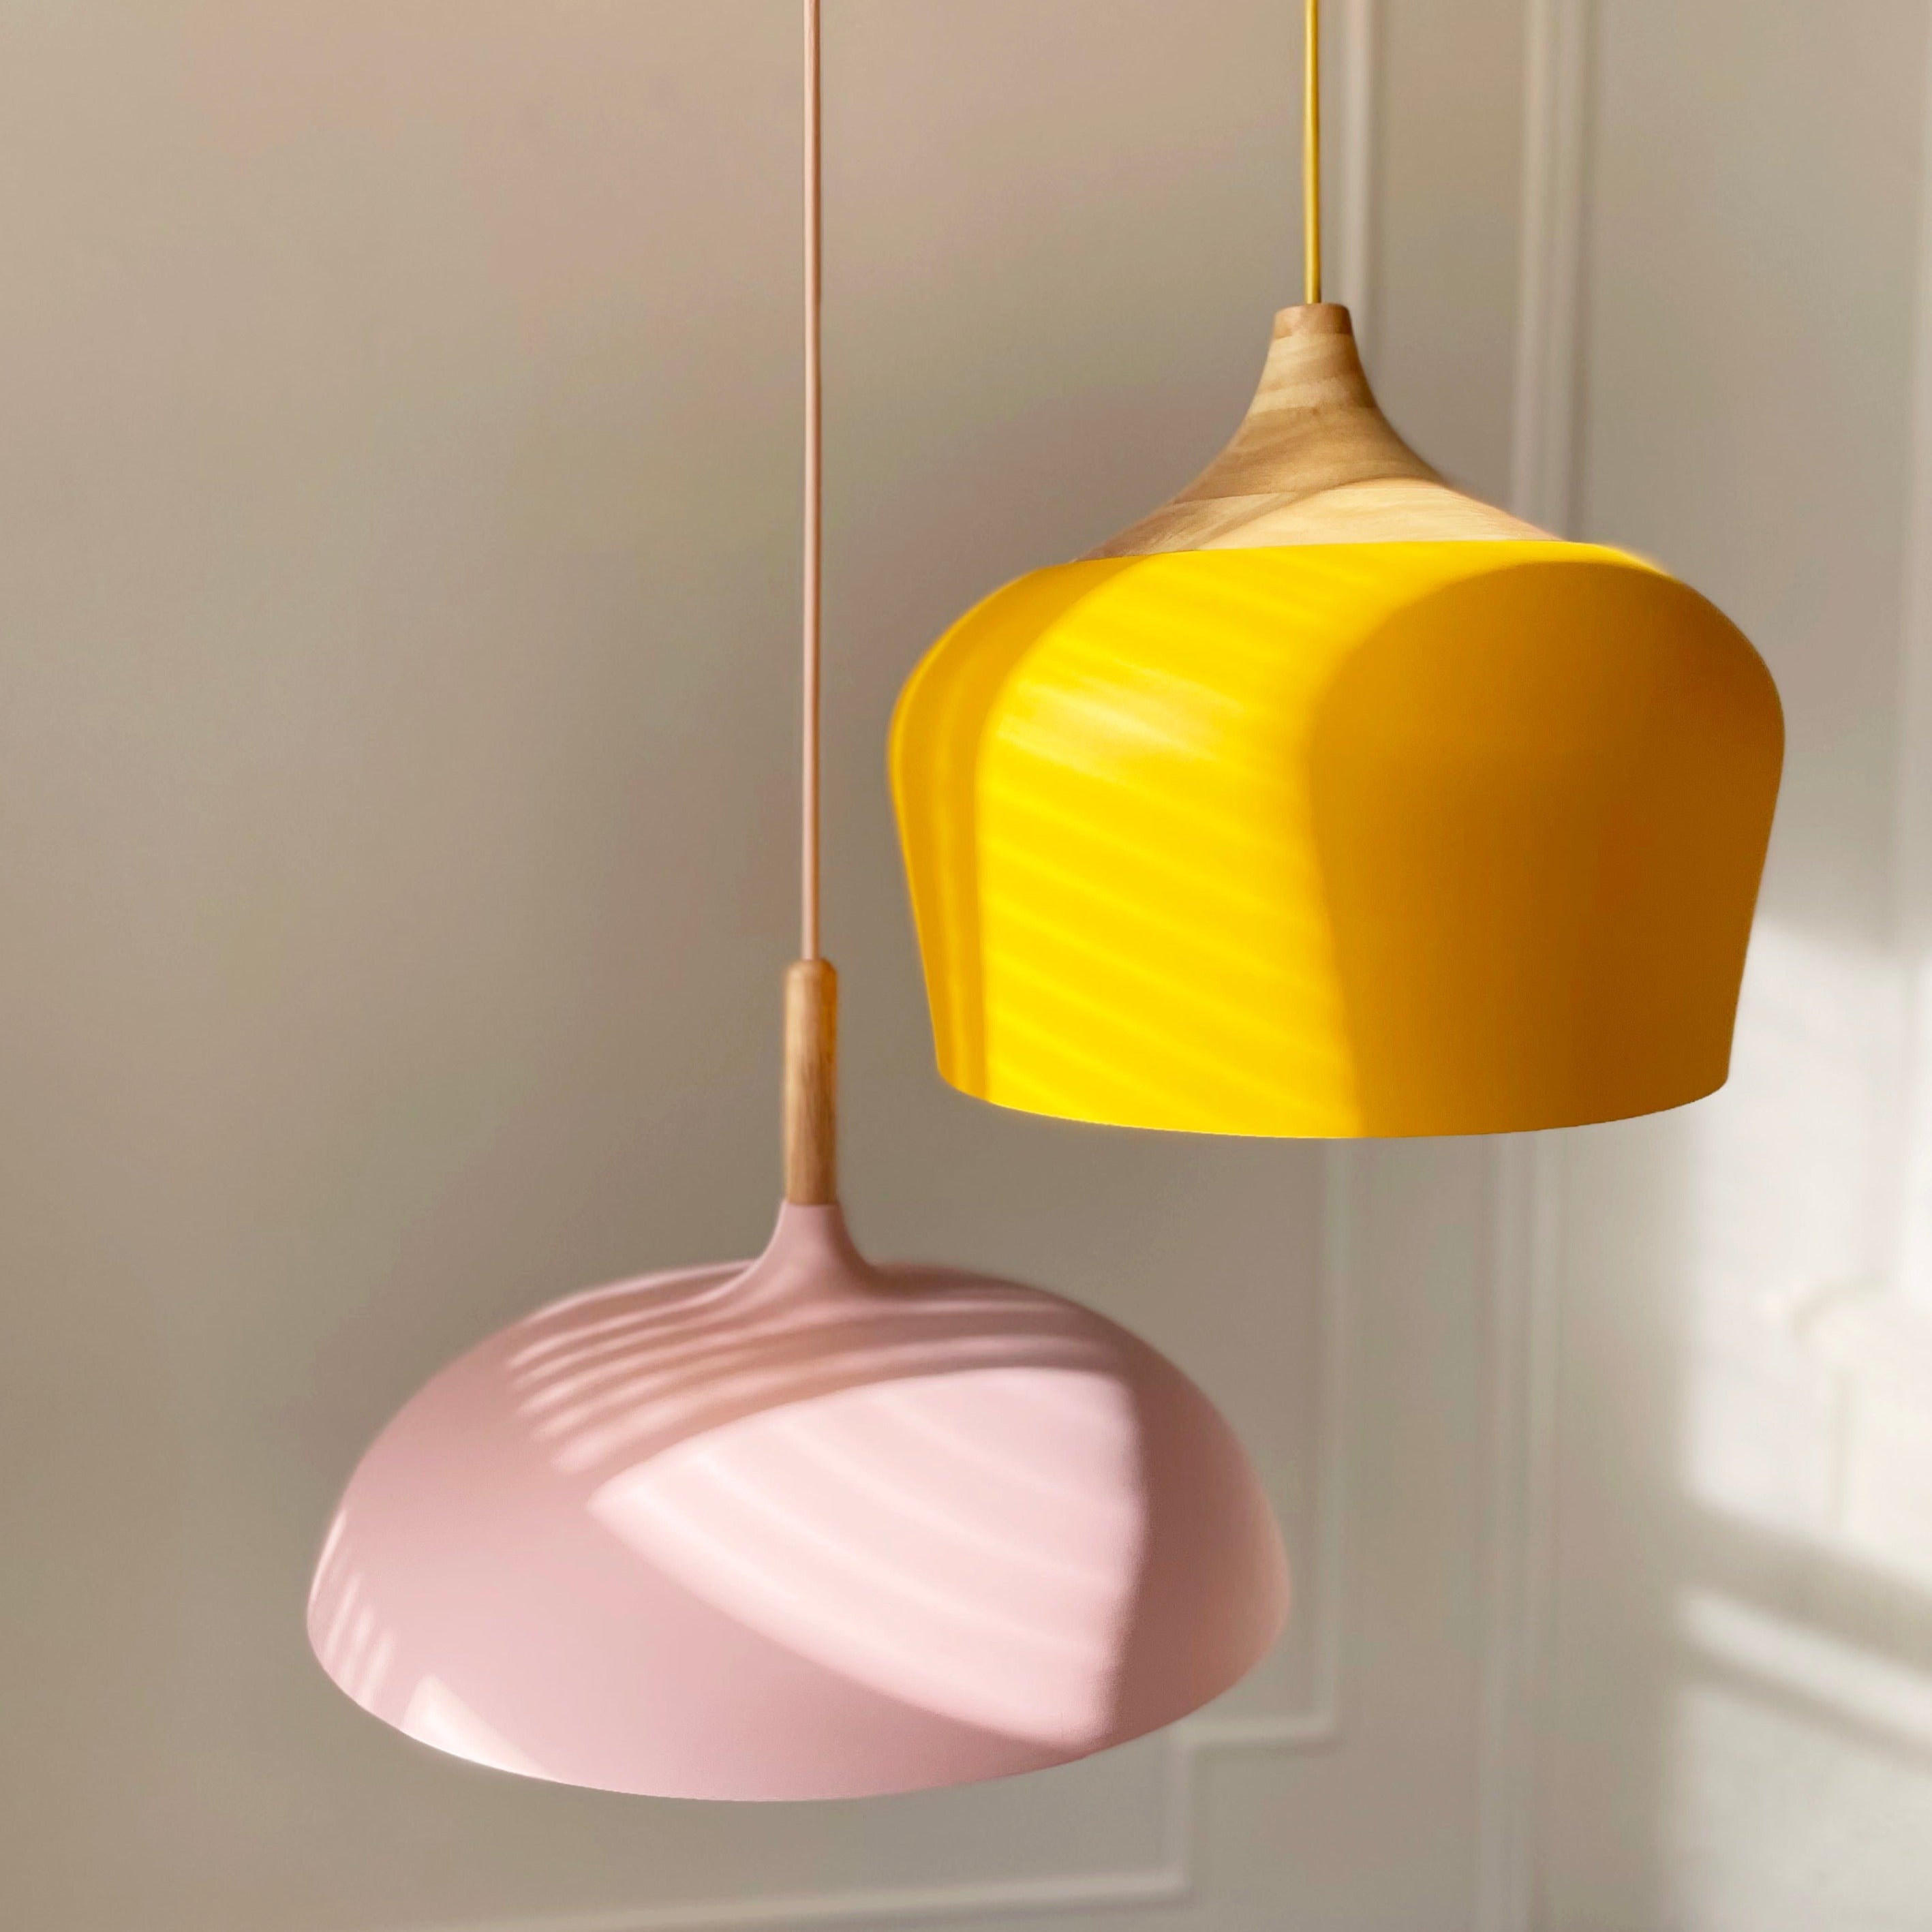 dome Aluminum lampshade with Wood detail pendant light